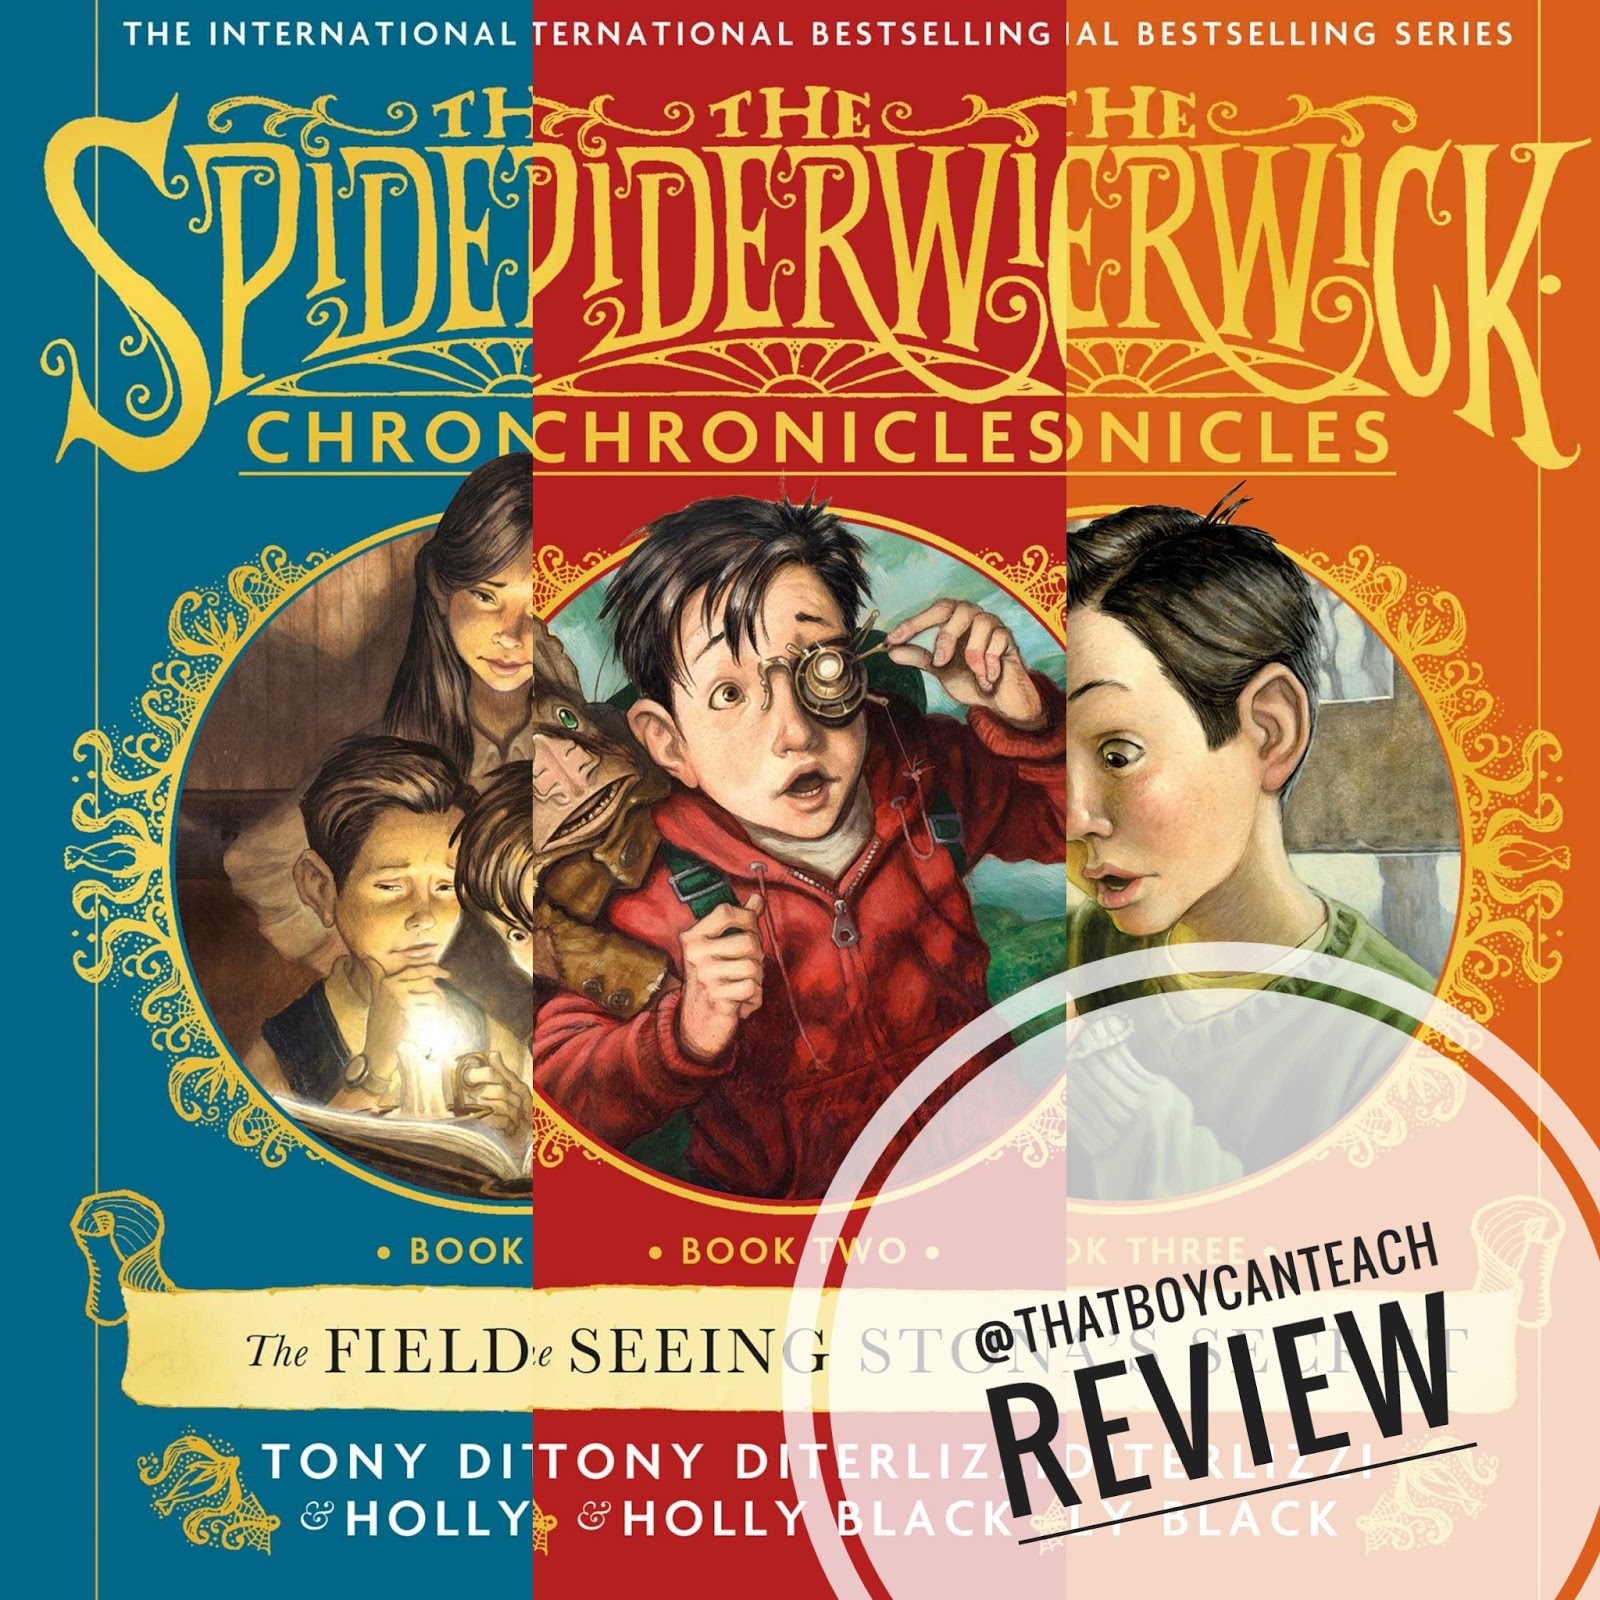 Book Review 'The Spiderwick Chronicles (Books 1 3)' by Tony